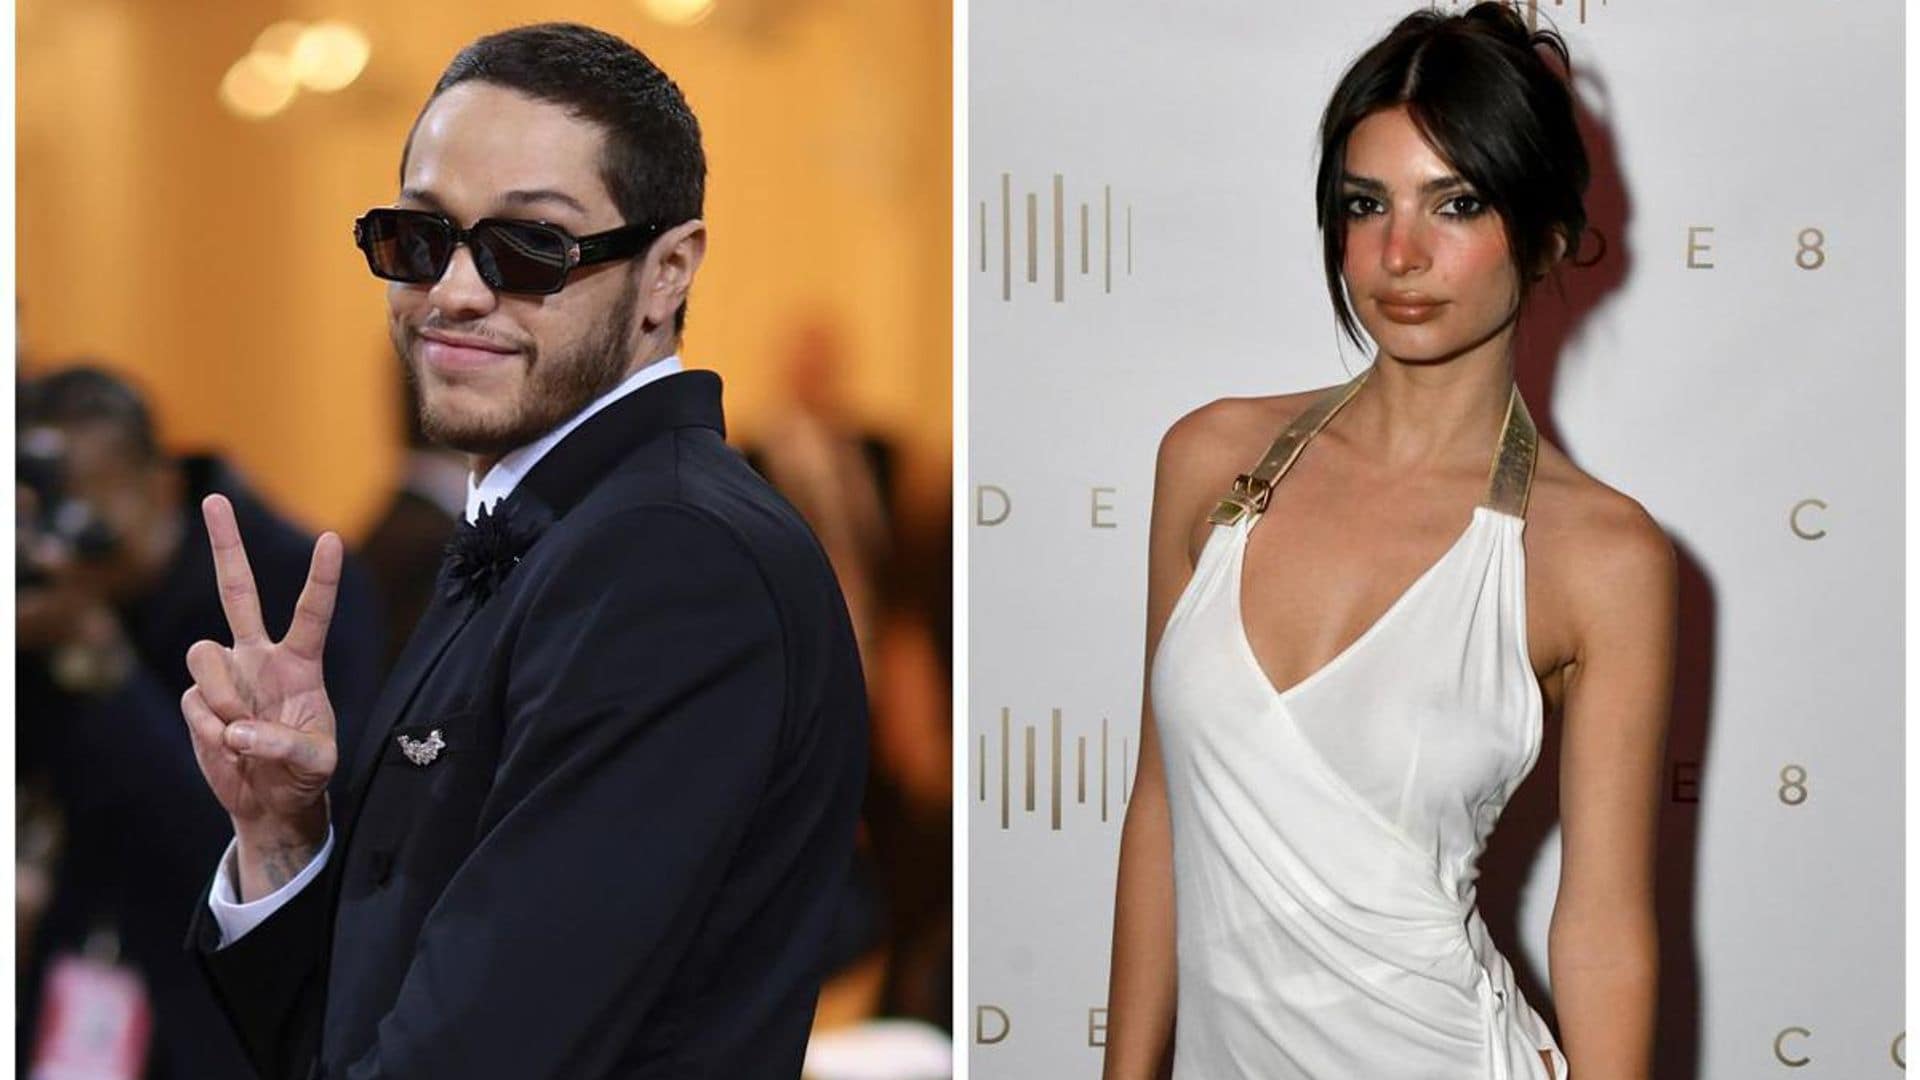 Pete Davidson and Emily Ratajkowski were reportedly spotted on a date